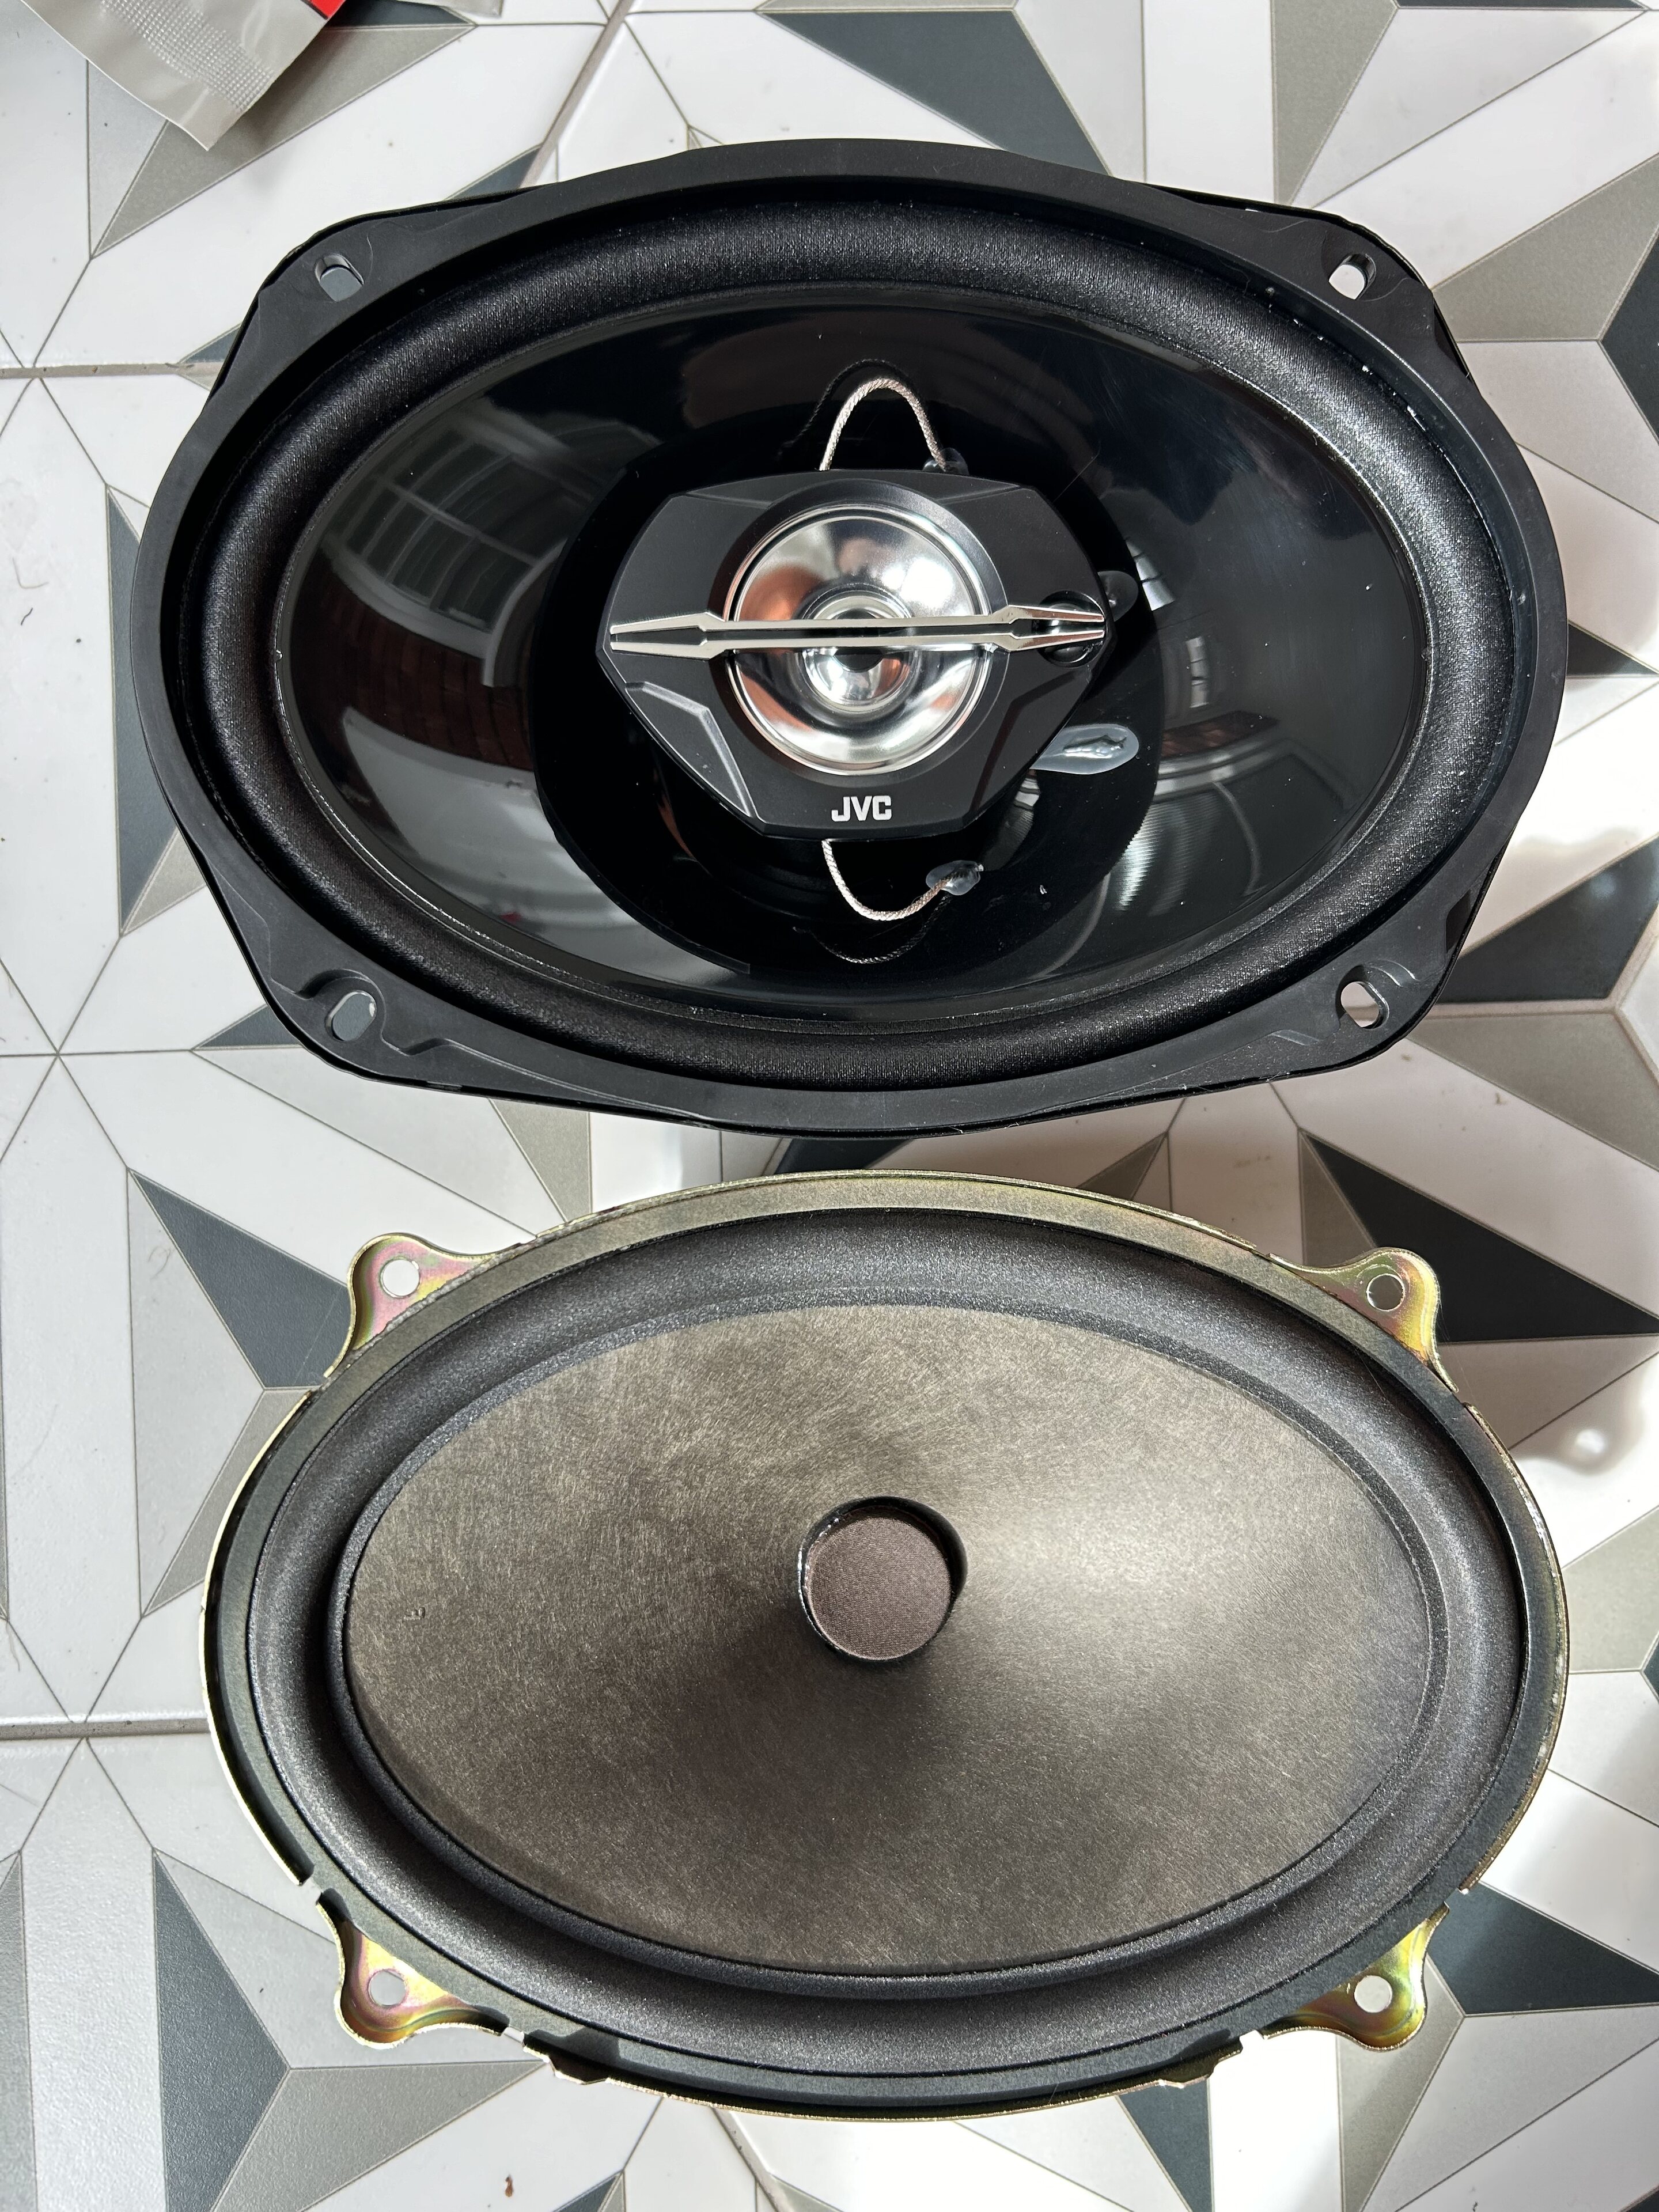 Pistonheads - The image shows two car speakers placed side by side against a white background. One speaker appears to be an older model with a black cone and silver trim, while the other is a newer model with a black cone and silver trim, but with some visible scratches on it. Both speakers are mounted in their respective metal frames, which have a shiny metallic finish. The photo seems to be taken from above to show the underside of the speakers and their mounting brackets. There is no text present in the image.